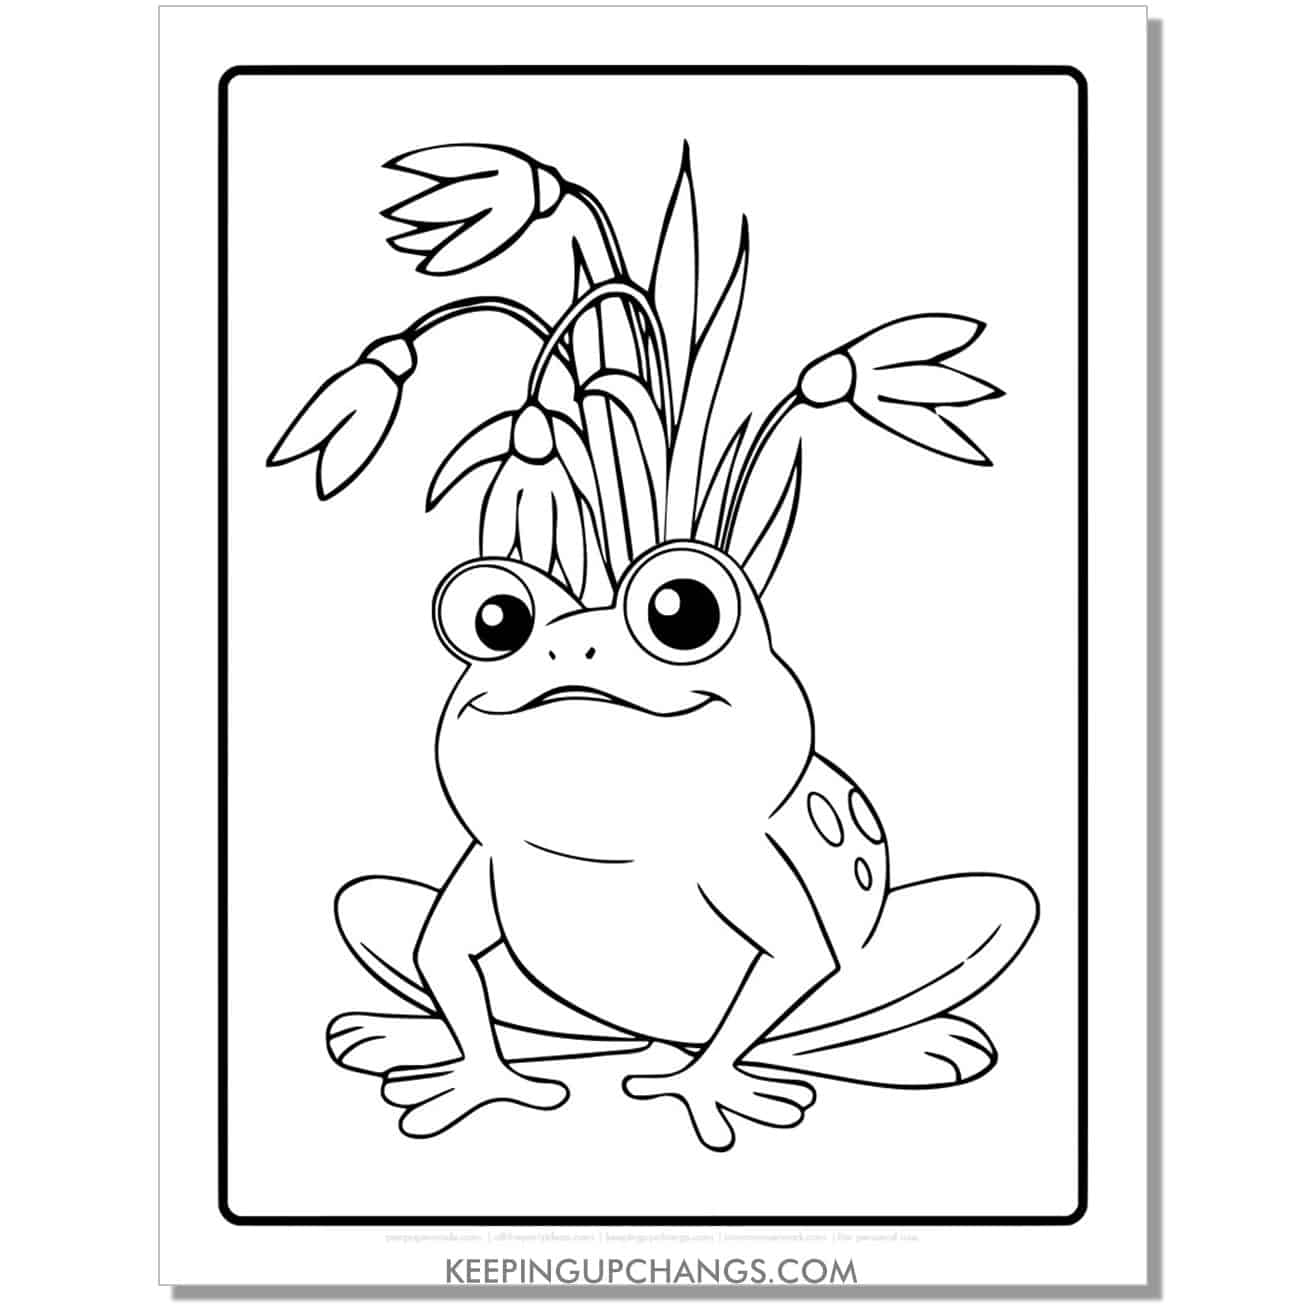 free cartoon frog coloring page, sheet with weeds.